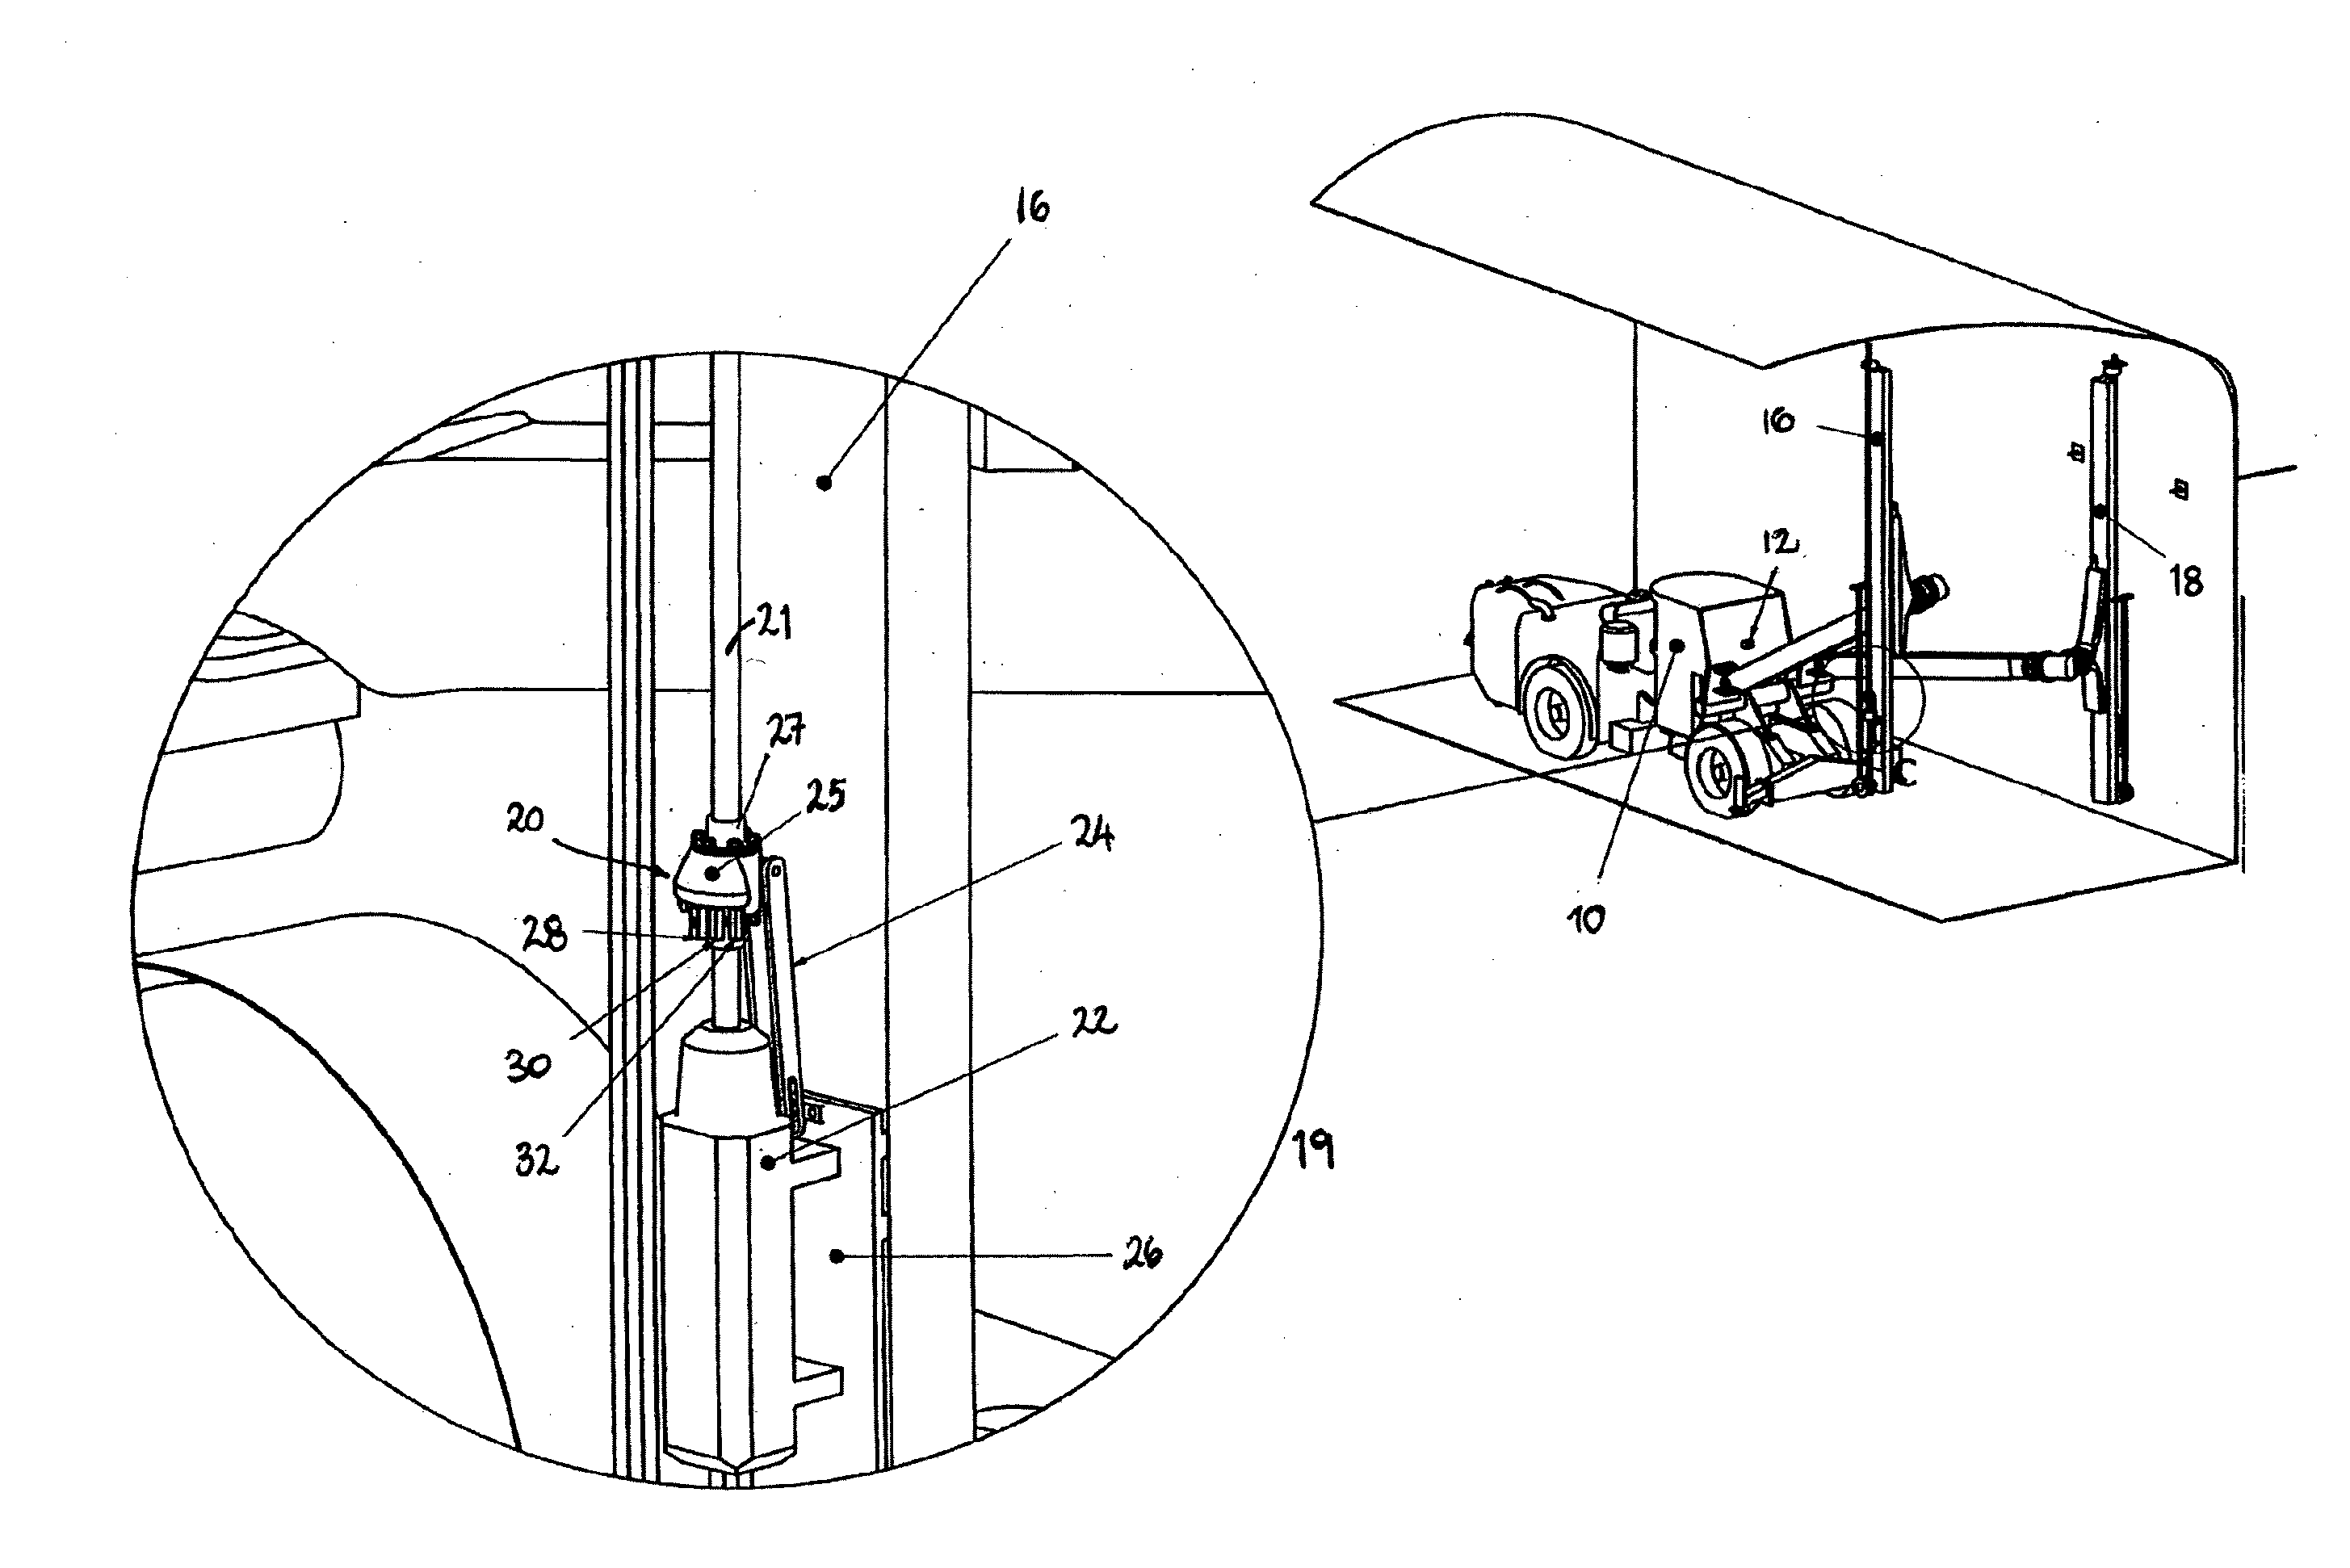 Resin injection apparatus for drilling apparatus for installing a ground anchor